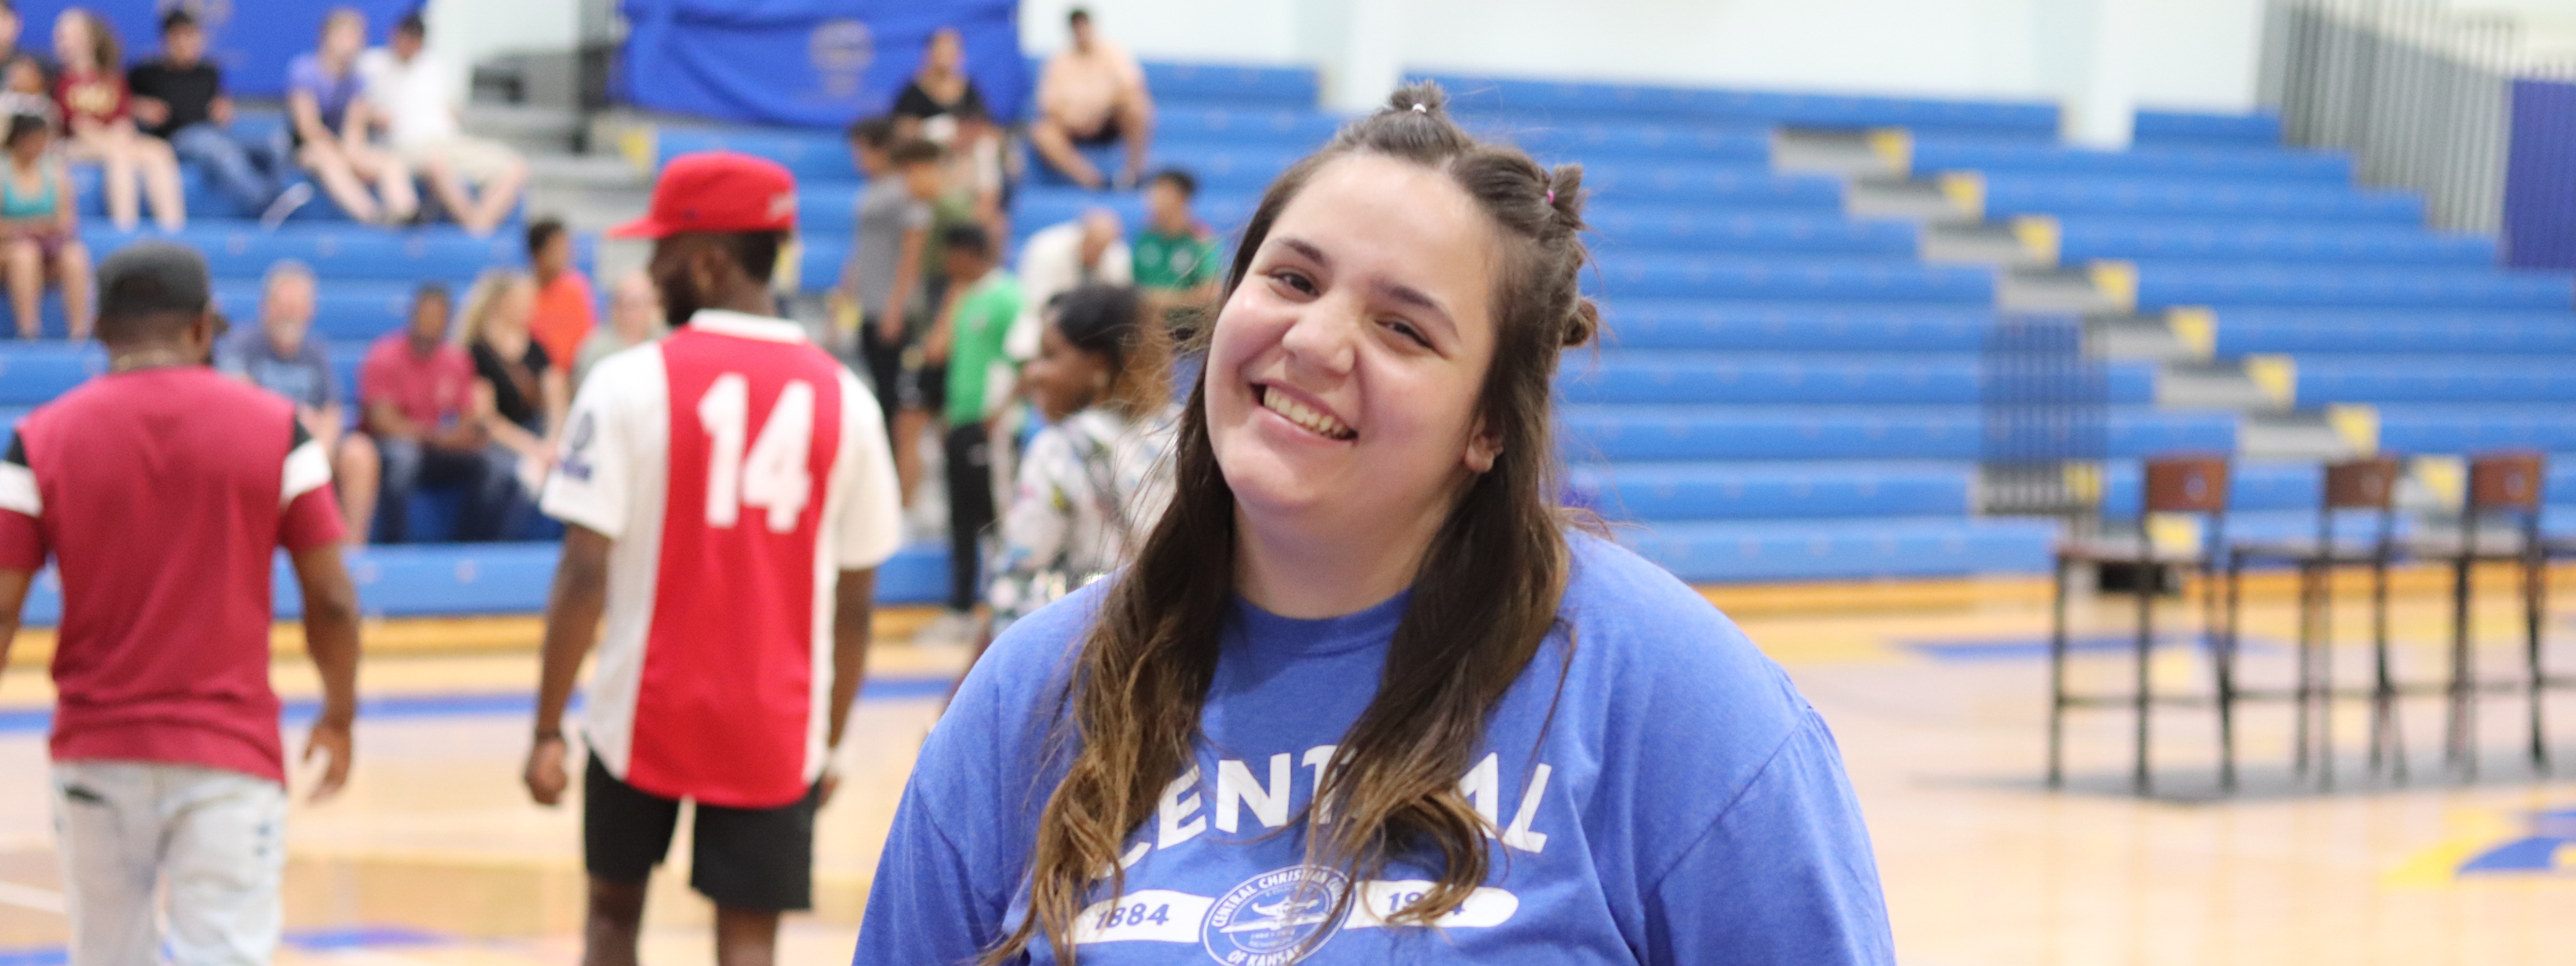 Health Sciences Photo Header: Central student standing and smiling in the gym